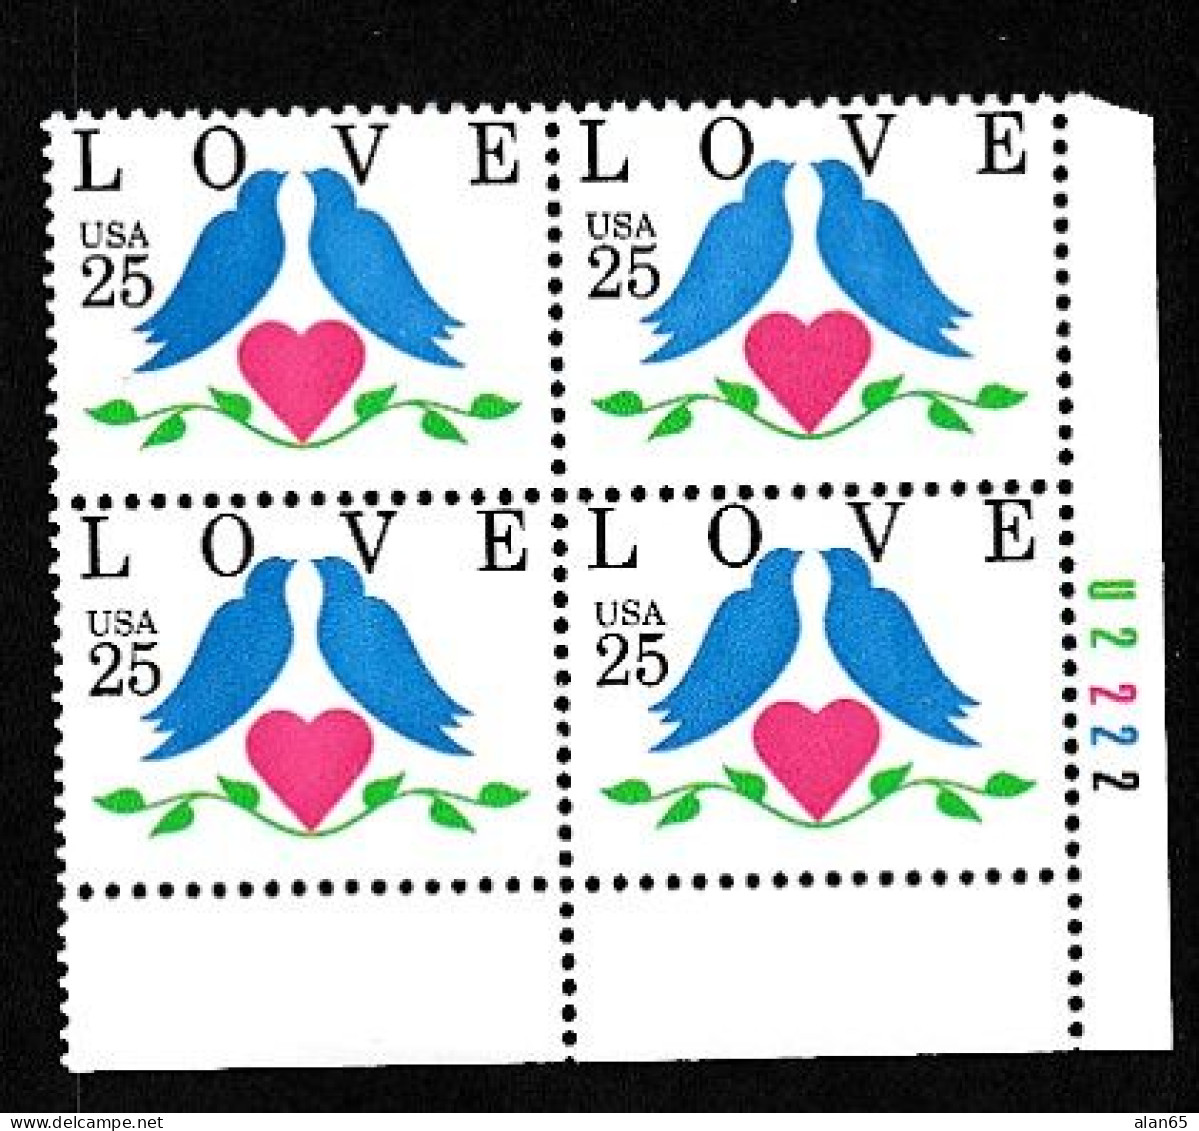 Sc#2440 'Love' Birds And Heart, 25-cent 1990 Issue, Plate # Block Of 4 MNH US Postage Stamps - Plate Blocks & Sheetlets